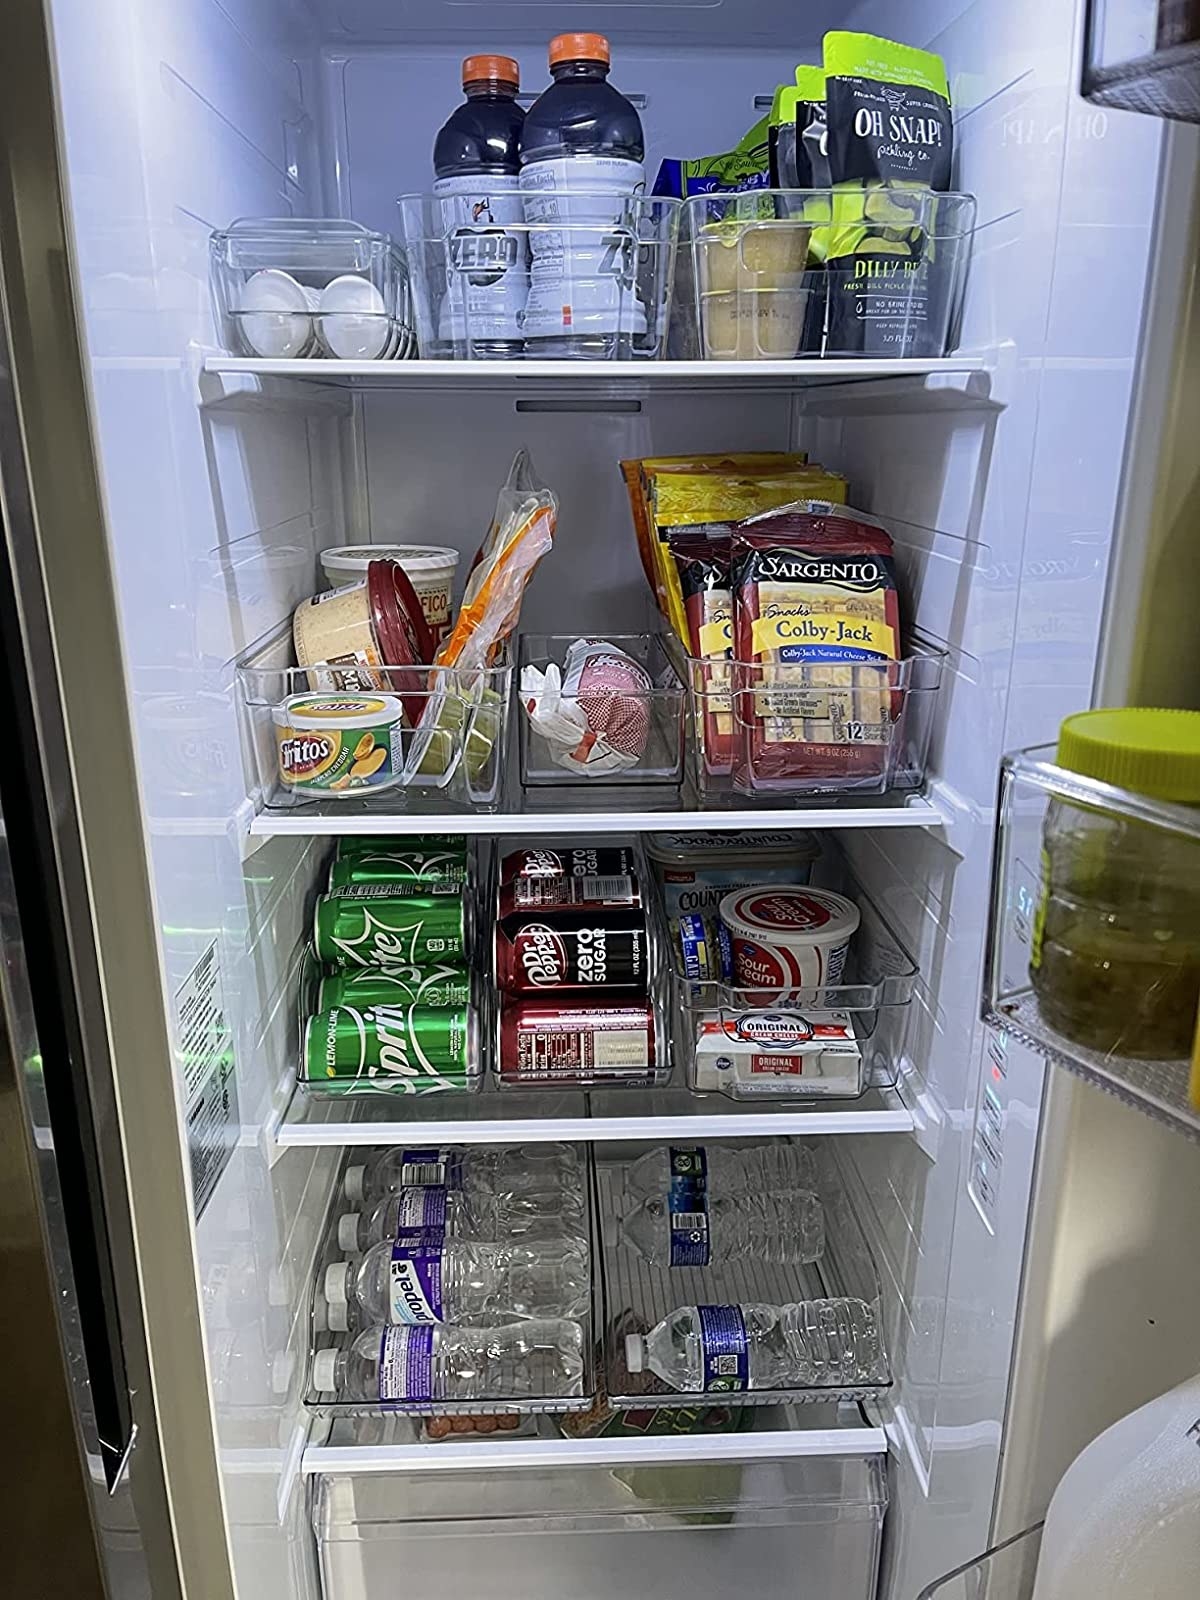 The reviewer shows a very well-organized fridge using the containers